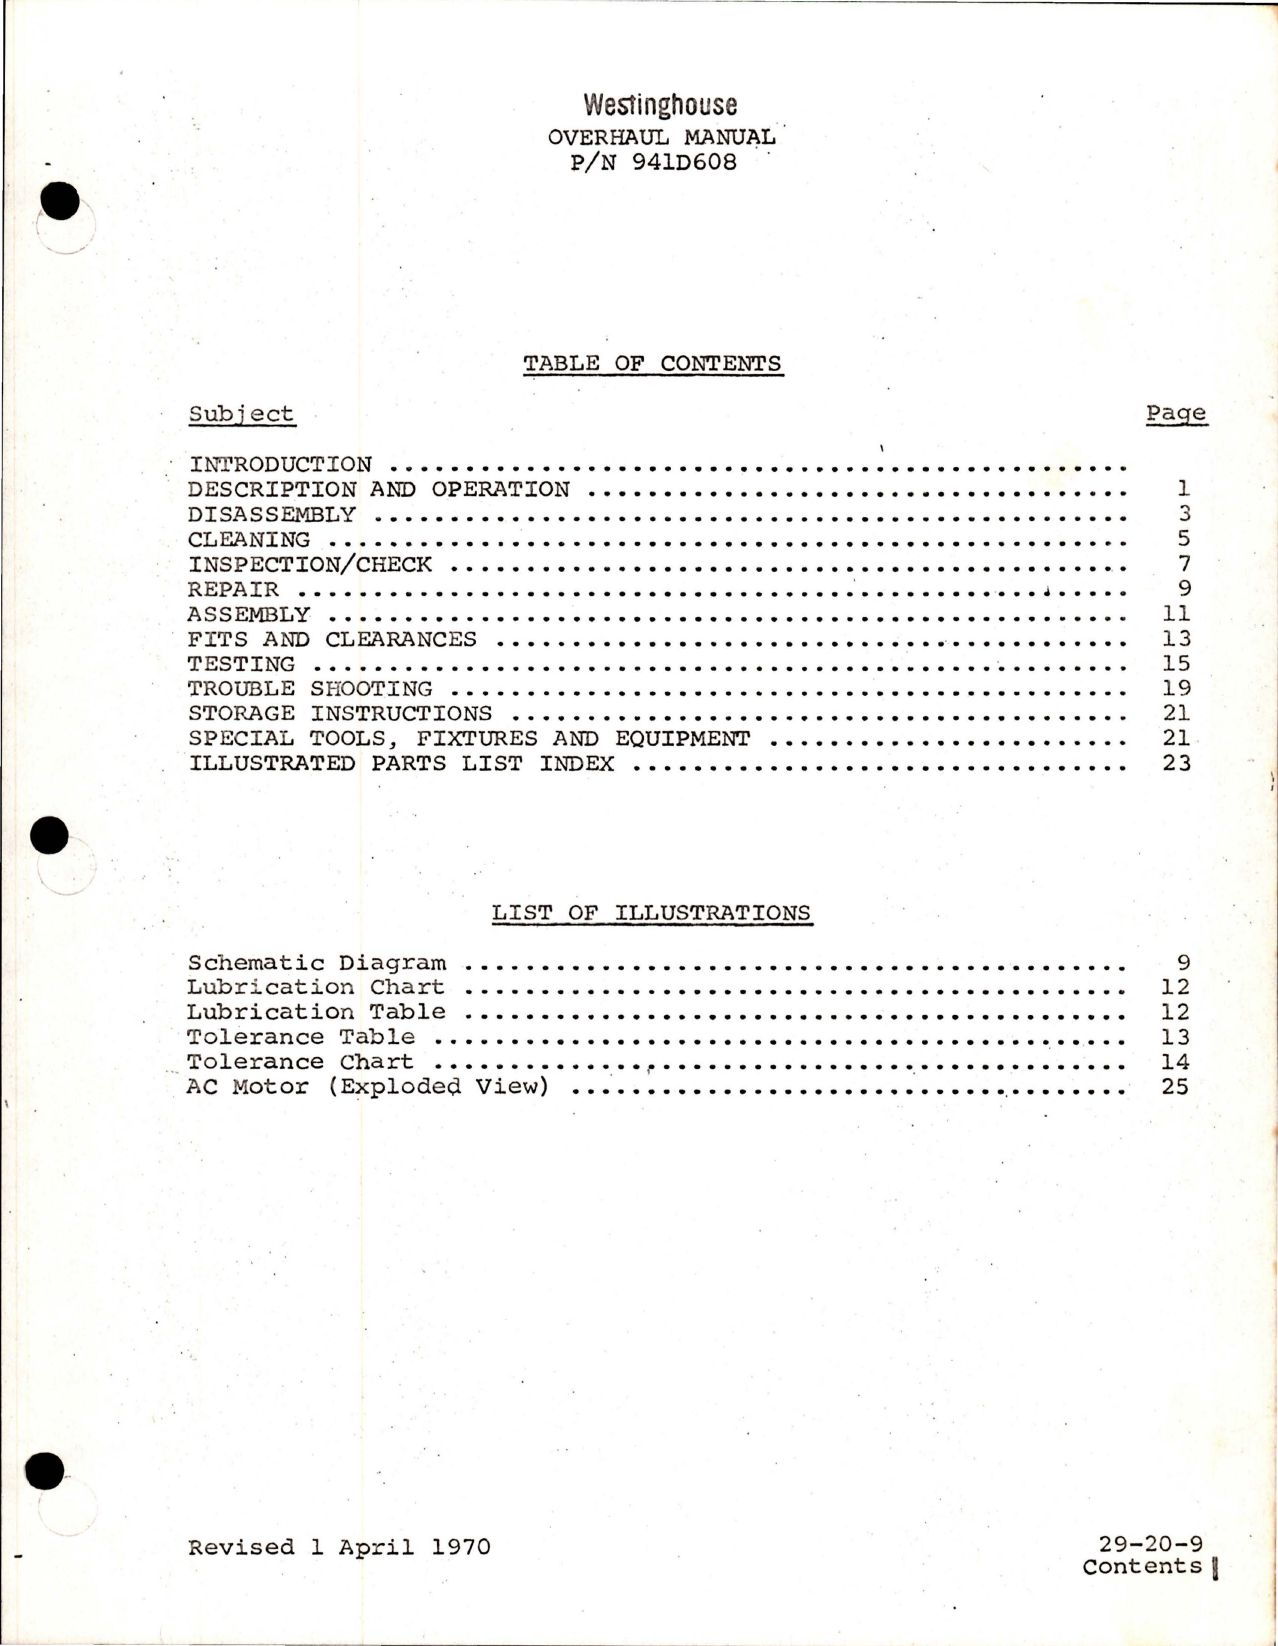 Sample page 9 from AirCorps Library document: Overhaul Manual for AC Motor - Part 941D608-2 and 941D608-4 